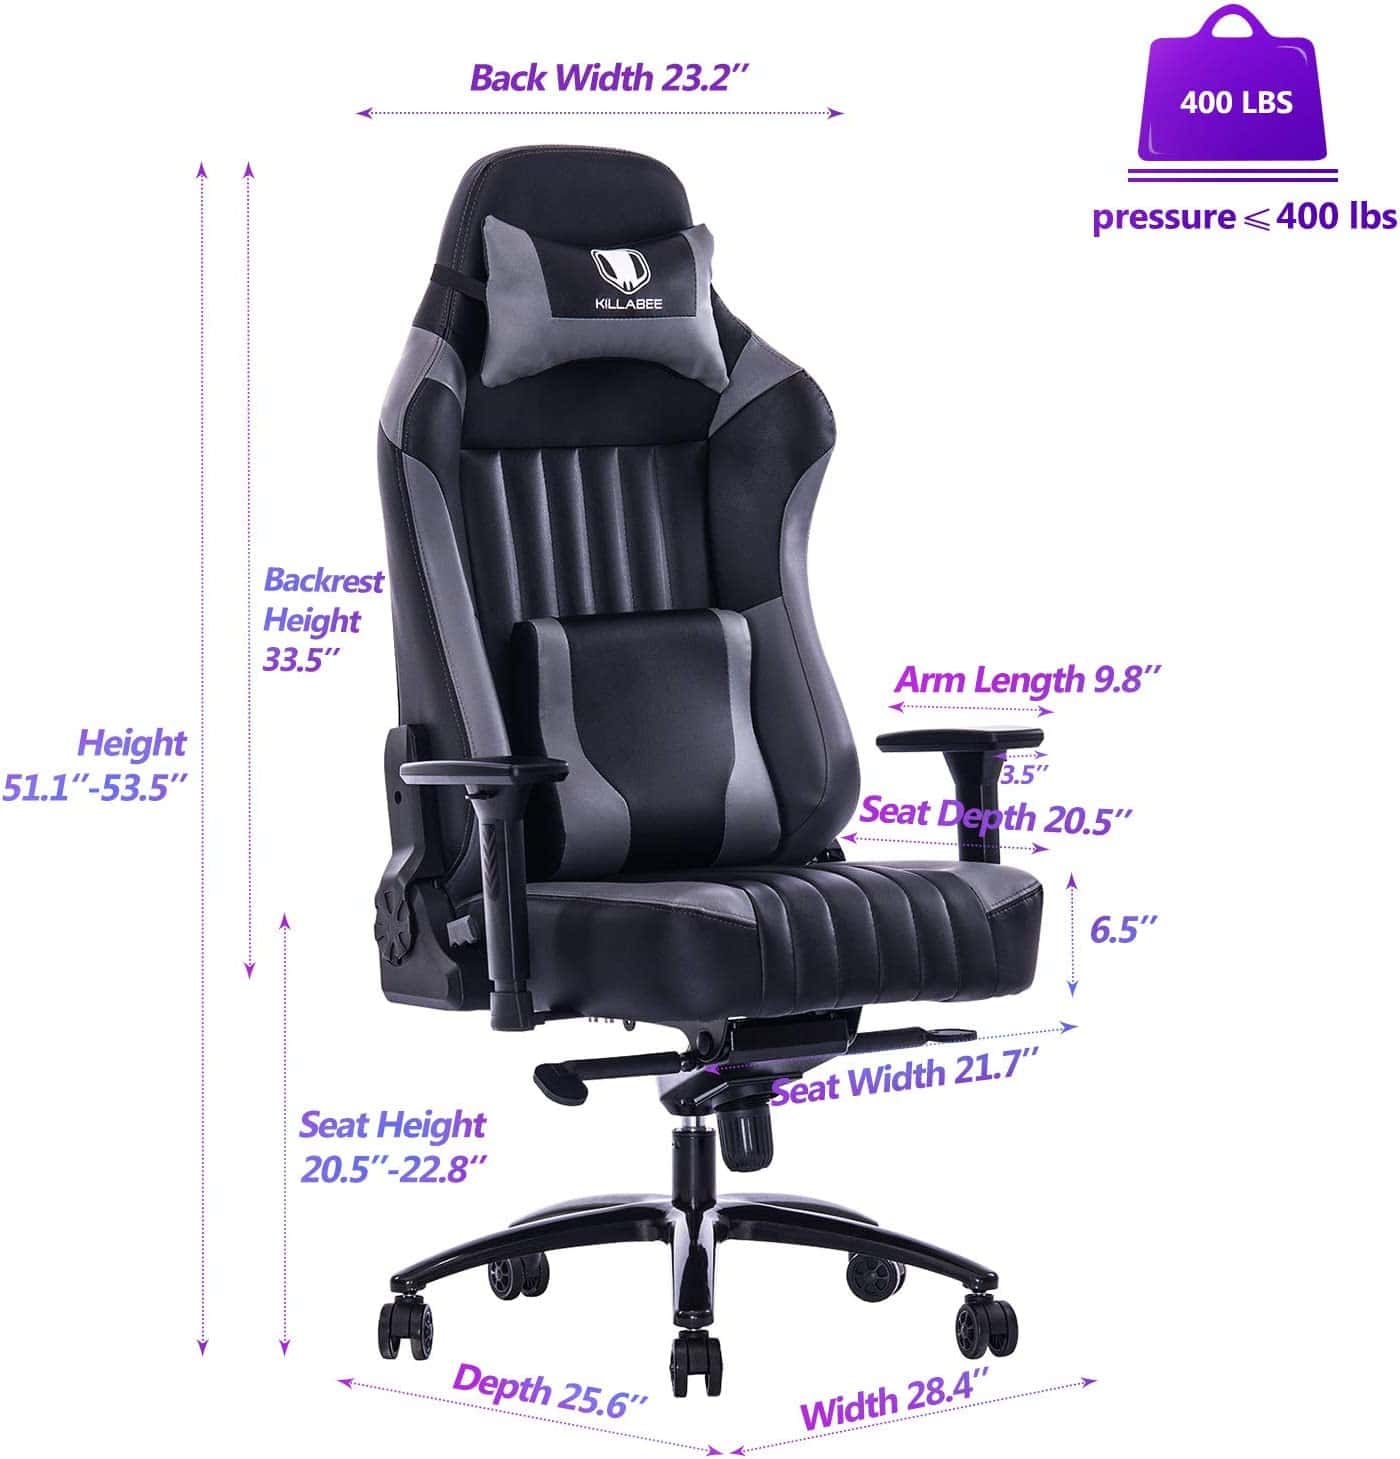 Killabee Big and Tall Gaming Chair Measurements